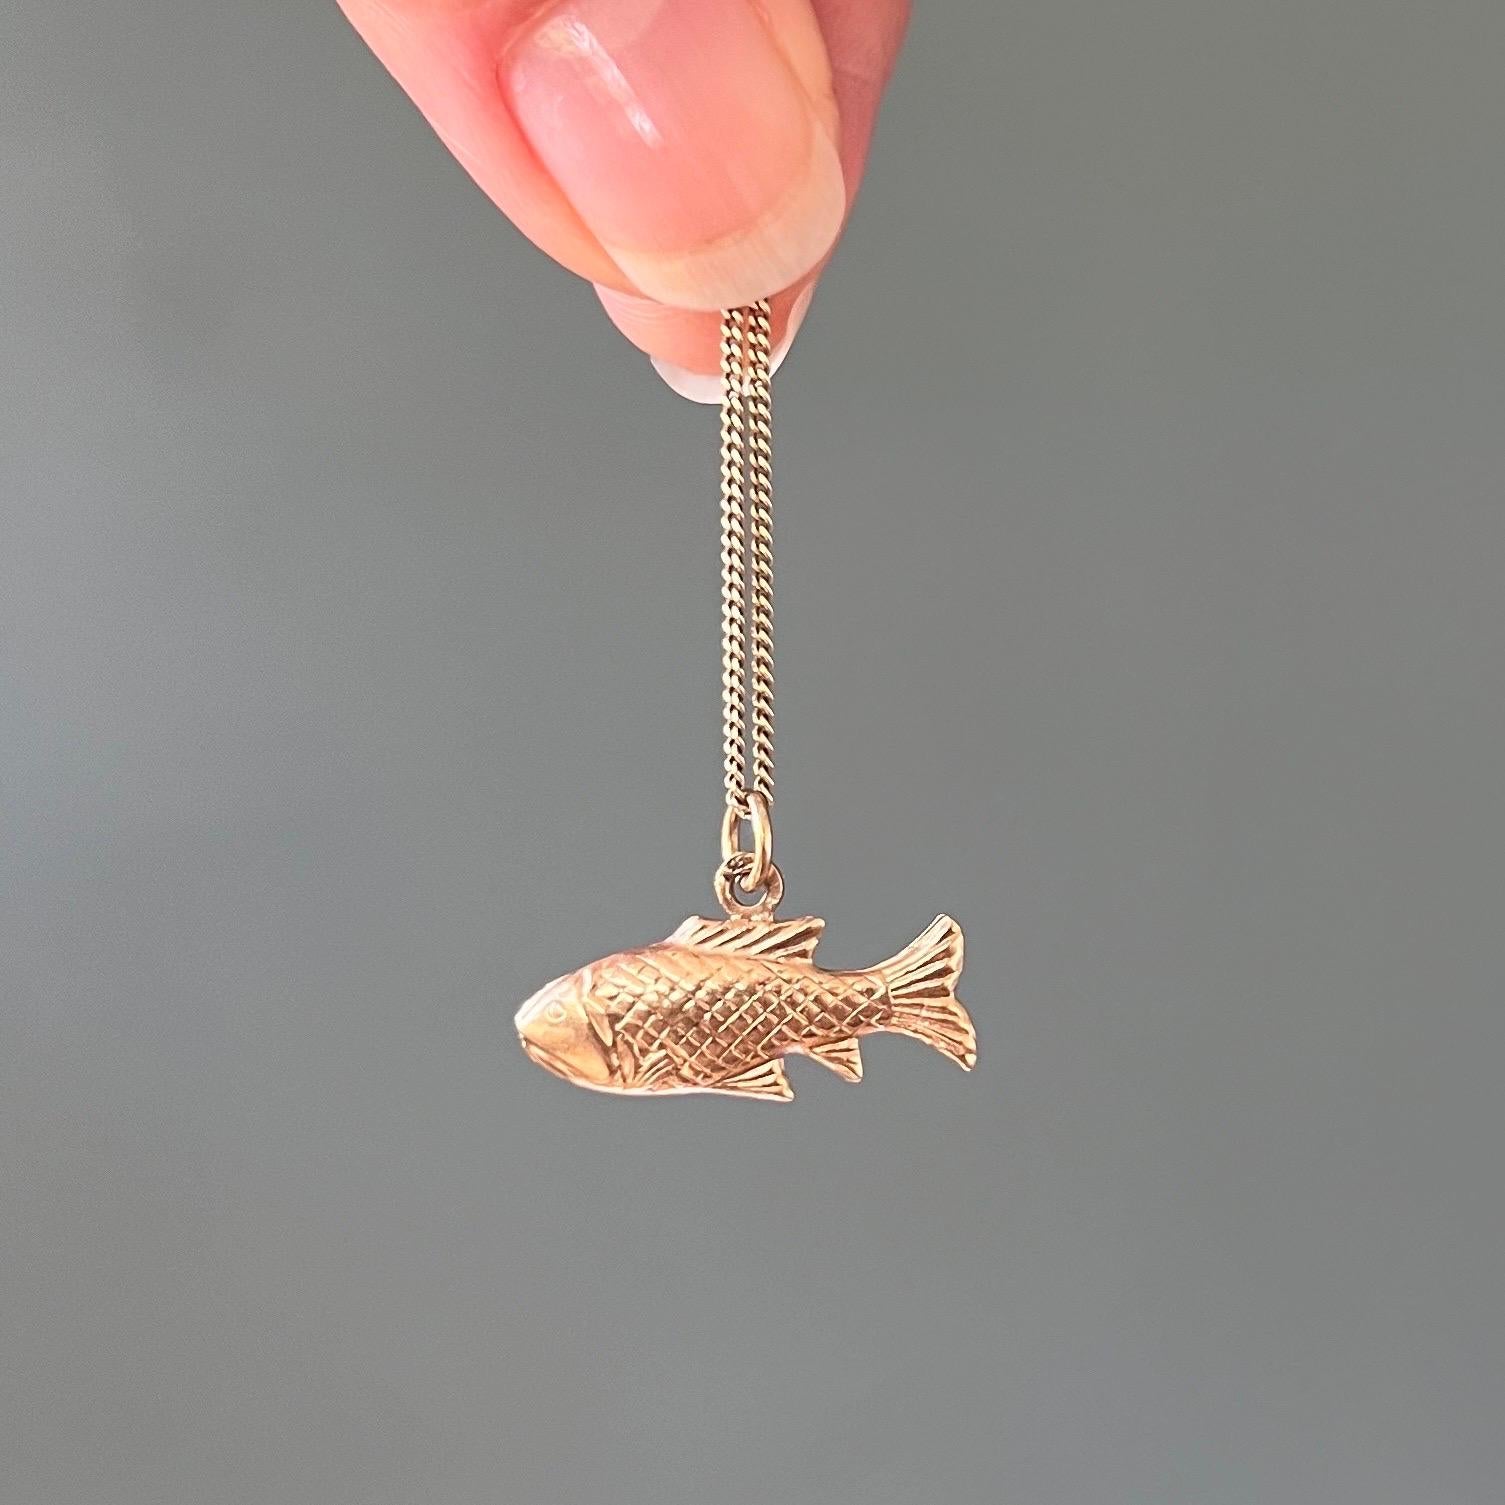 This 14 karat gold fish pisces zodiac charm is beautifully detailed with scales and fins. The fish symbol is associated with wisdom, creativity and fertility. The charm is great worn alone on a necklace chain or as an addition to your charms